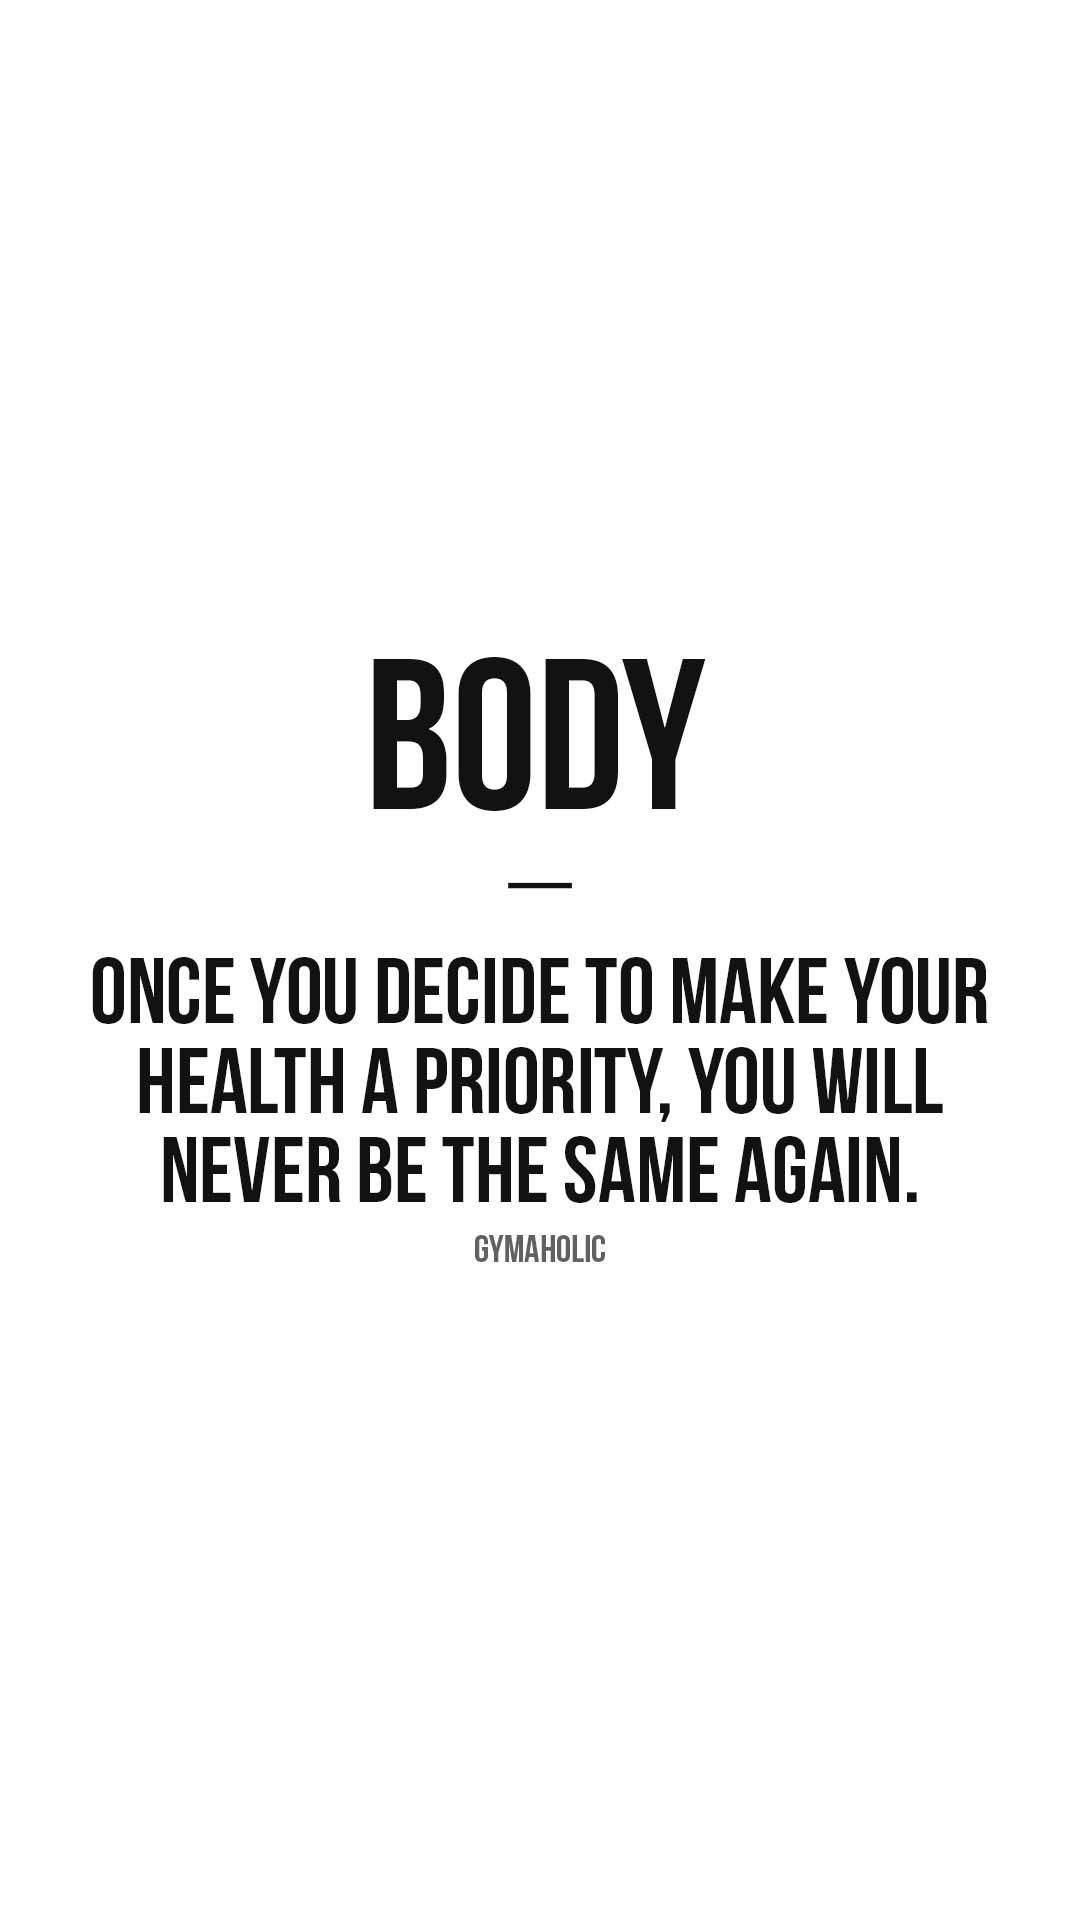 Body: once you decide to make your health a priority